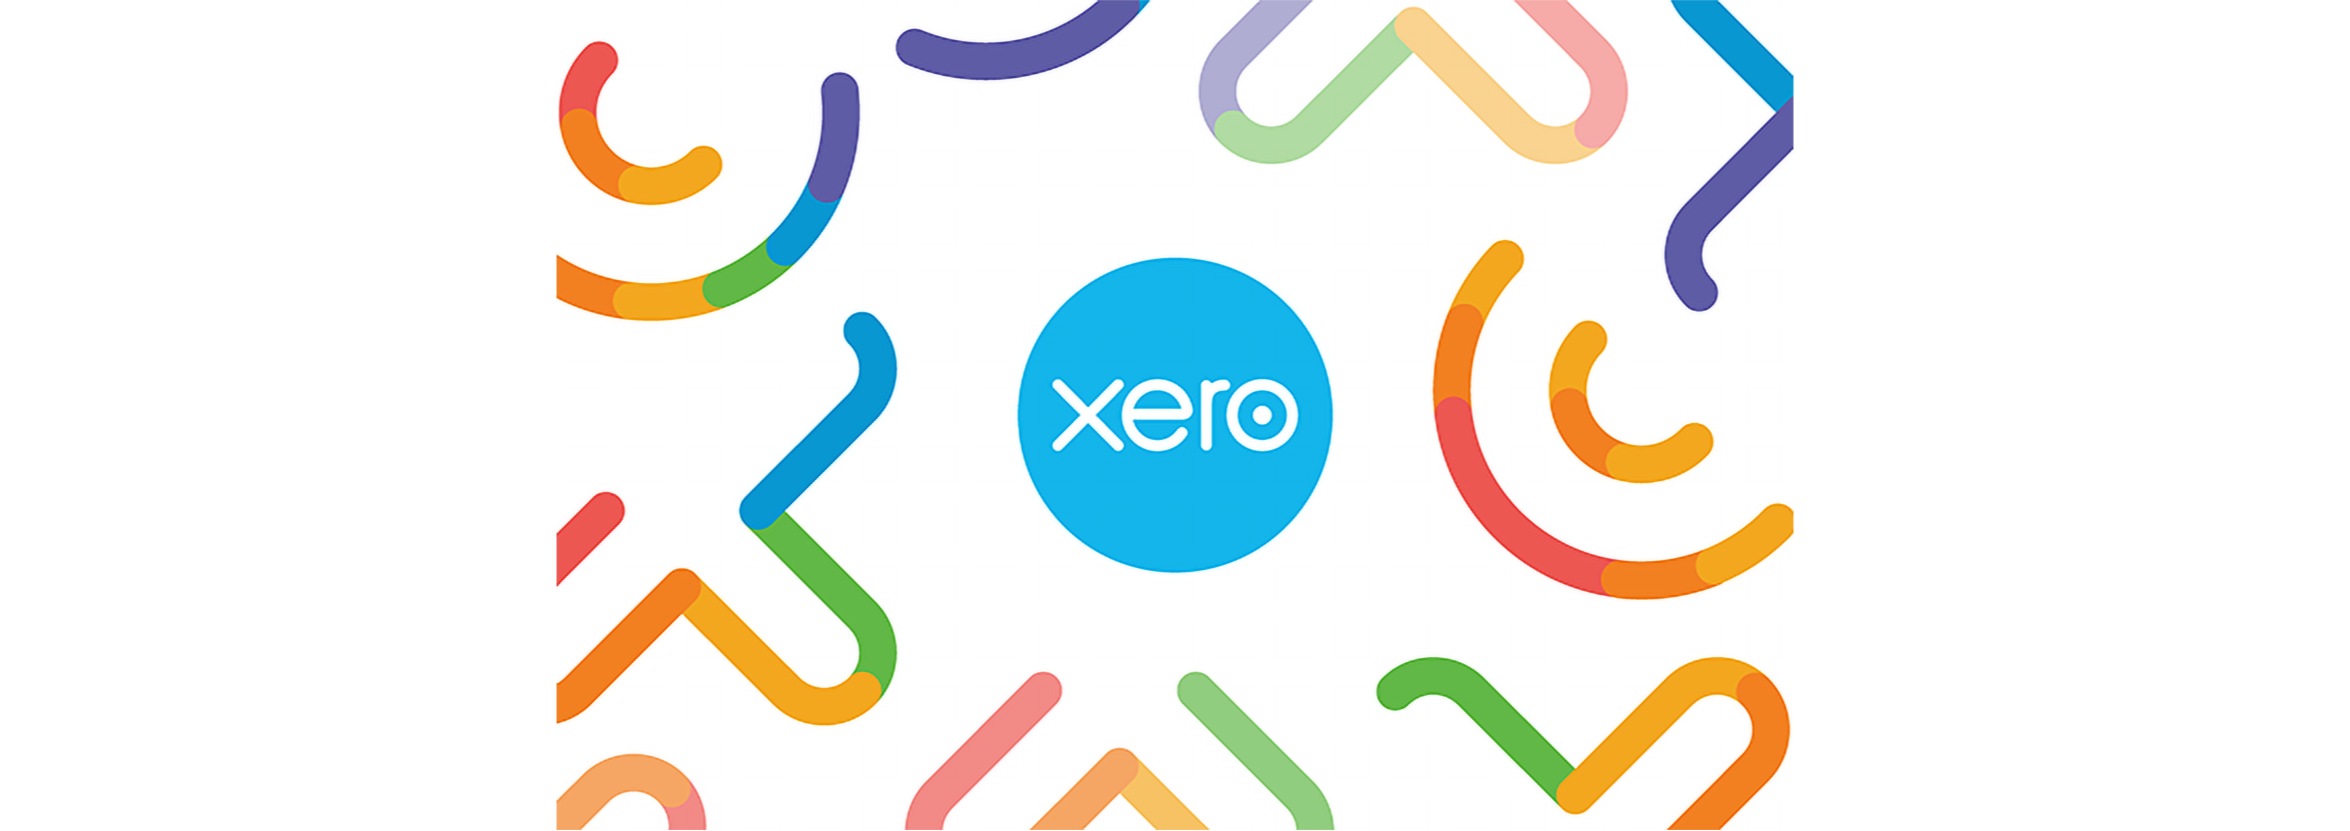 A Xero logo surrounded by colourful graphics.